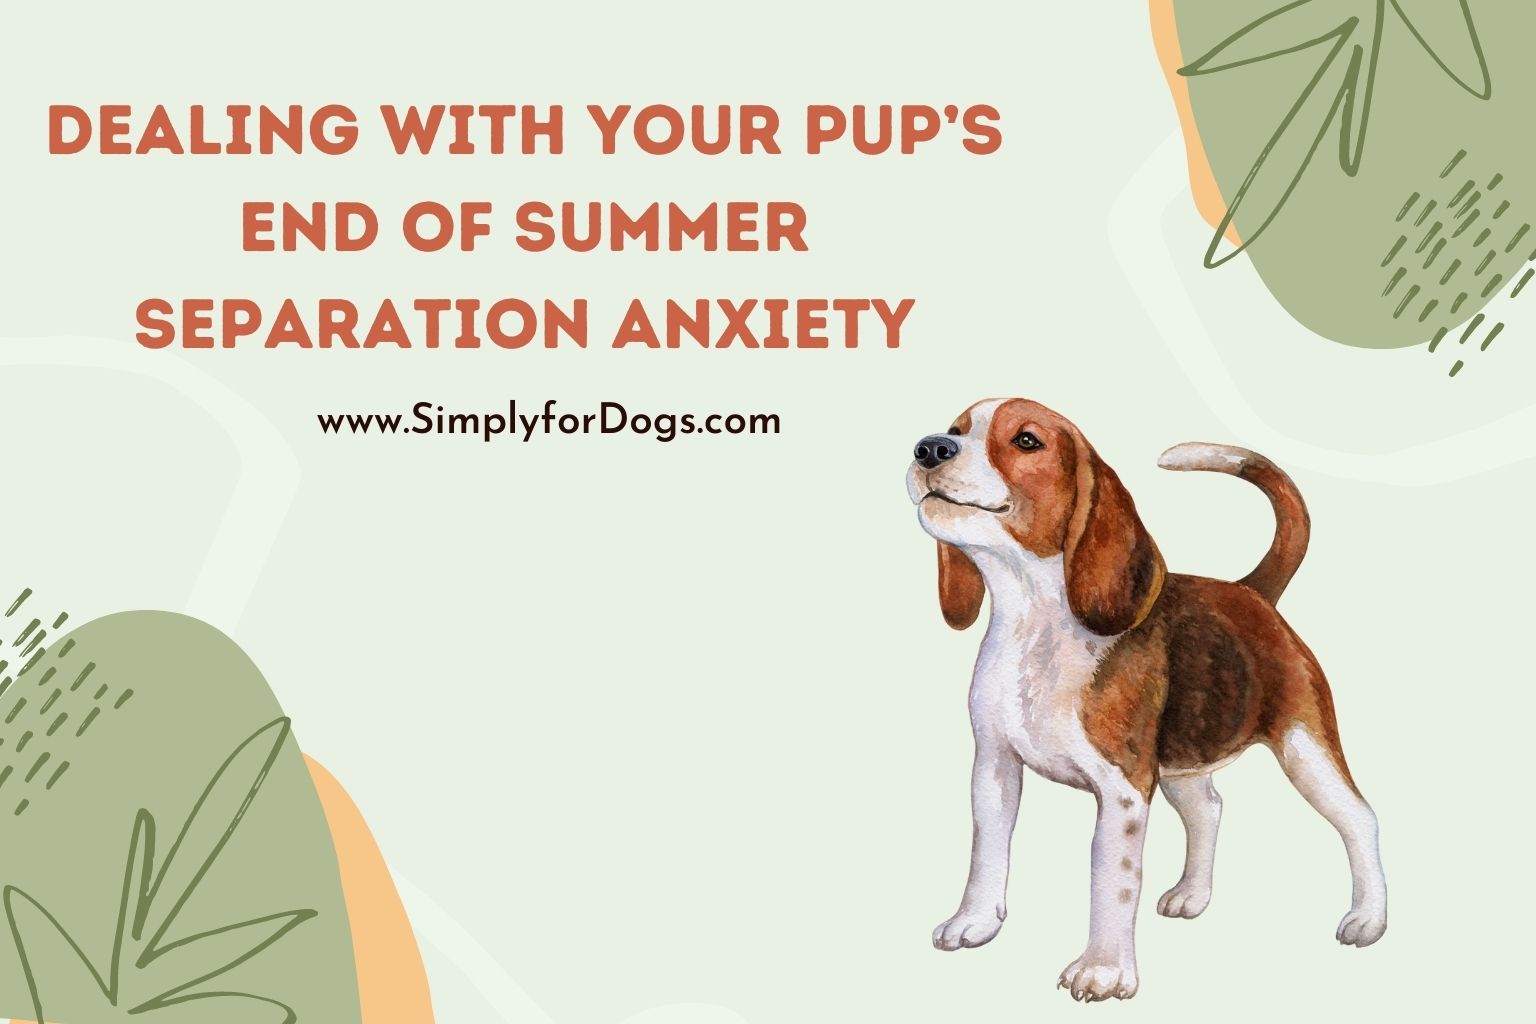 Dealing with Your Pup’s End of Summer Separation Anxiety